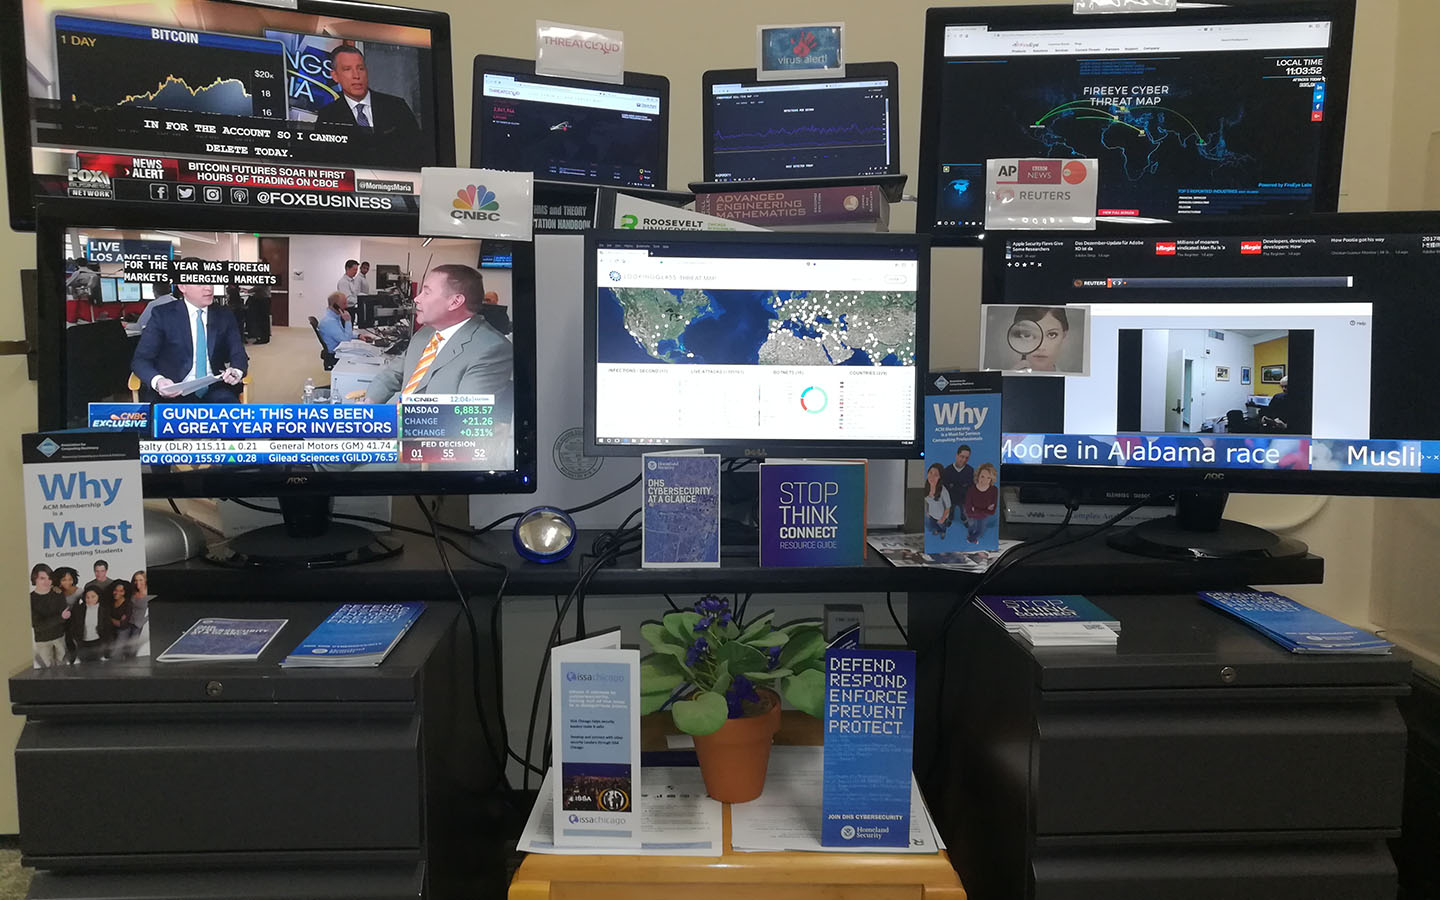 Multiple compute monitors and laptops with data analysis and news displayed on the screens